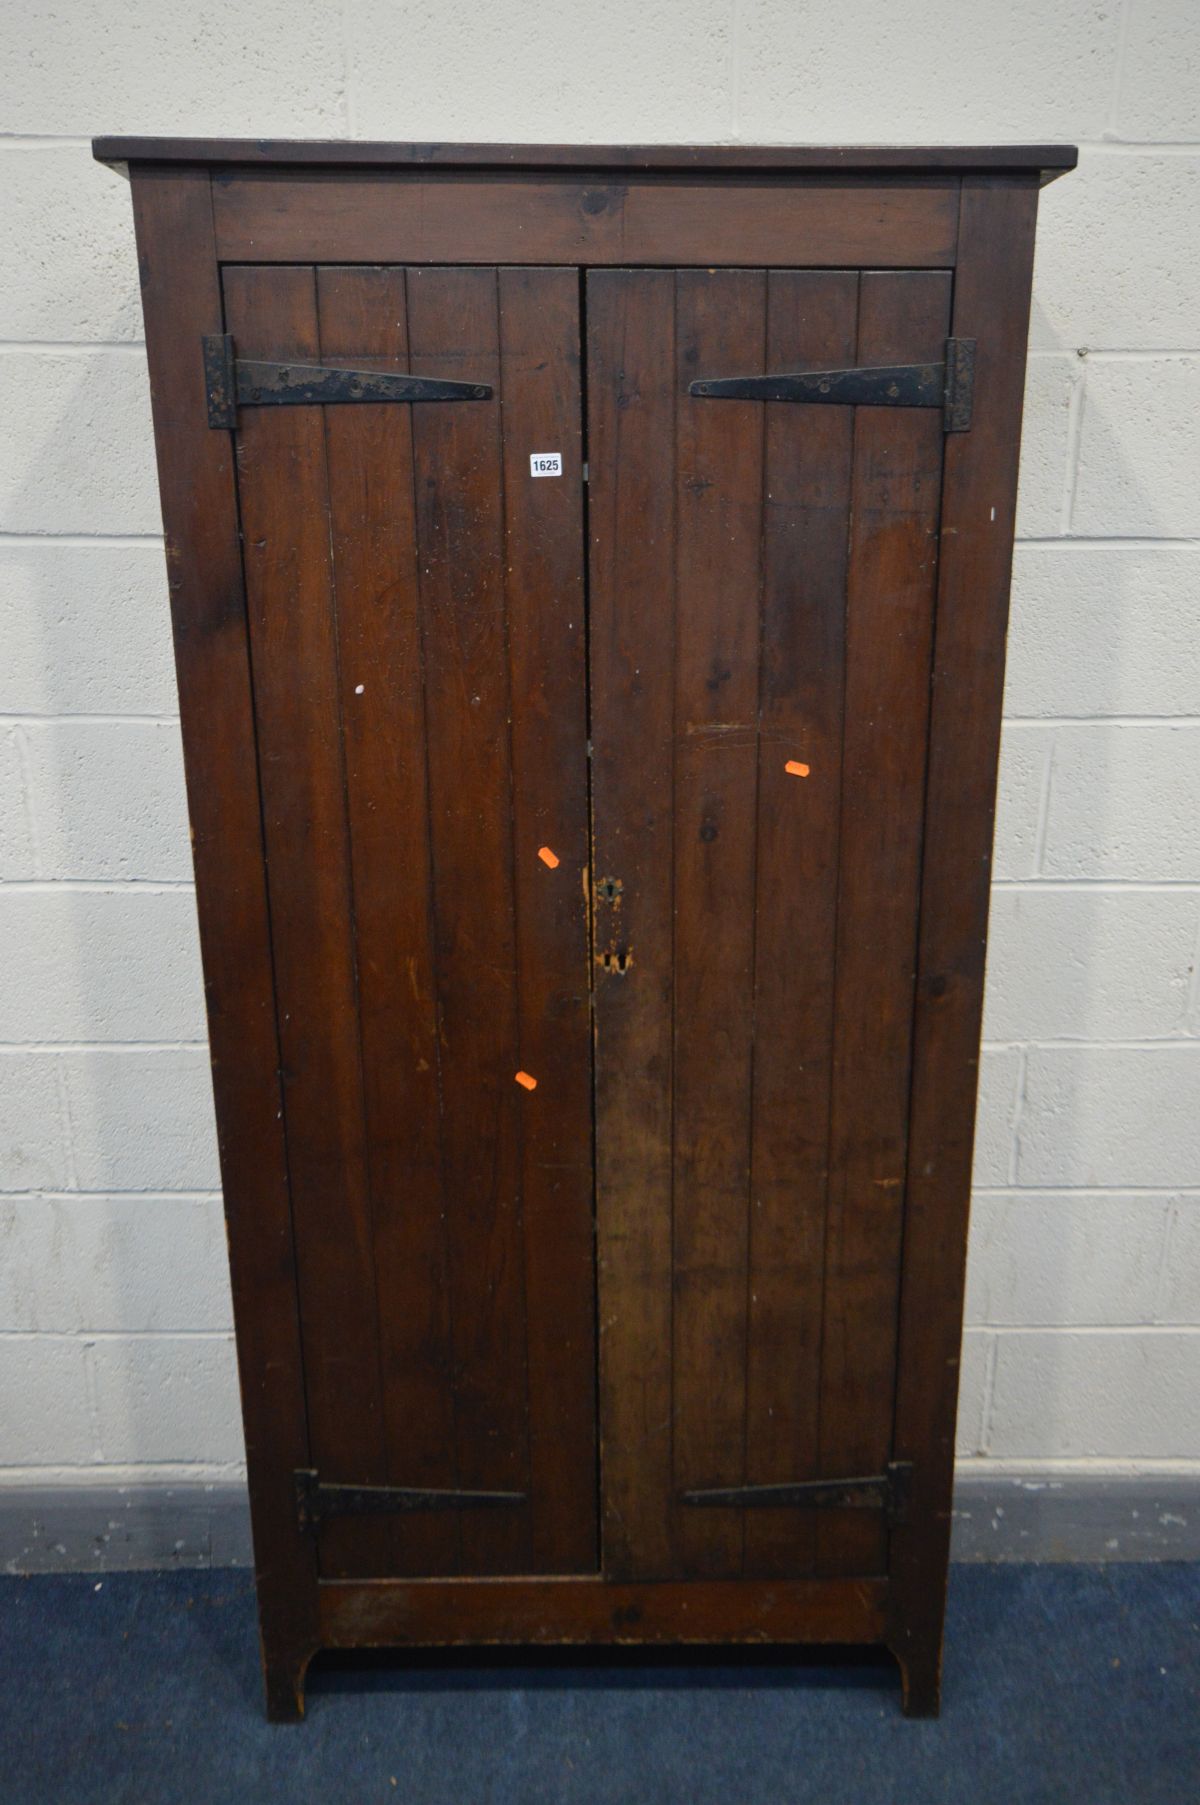 AN EARLY 20TH CENTURY SLATTED TWO DOOR CUPBOARD, width 96cm x depth 31cm x height 191cm - this lot